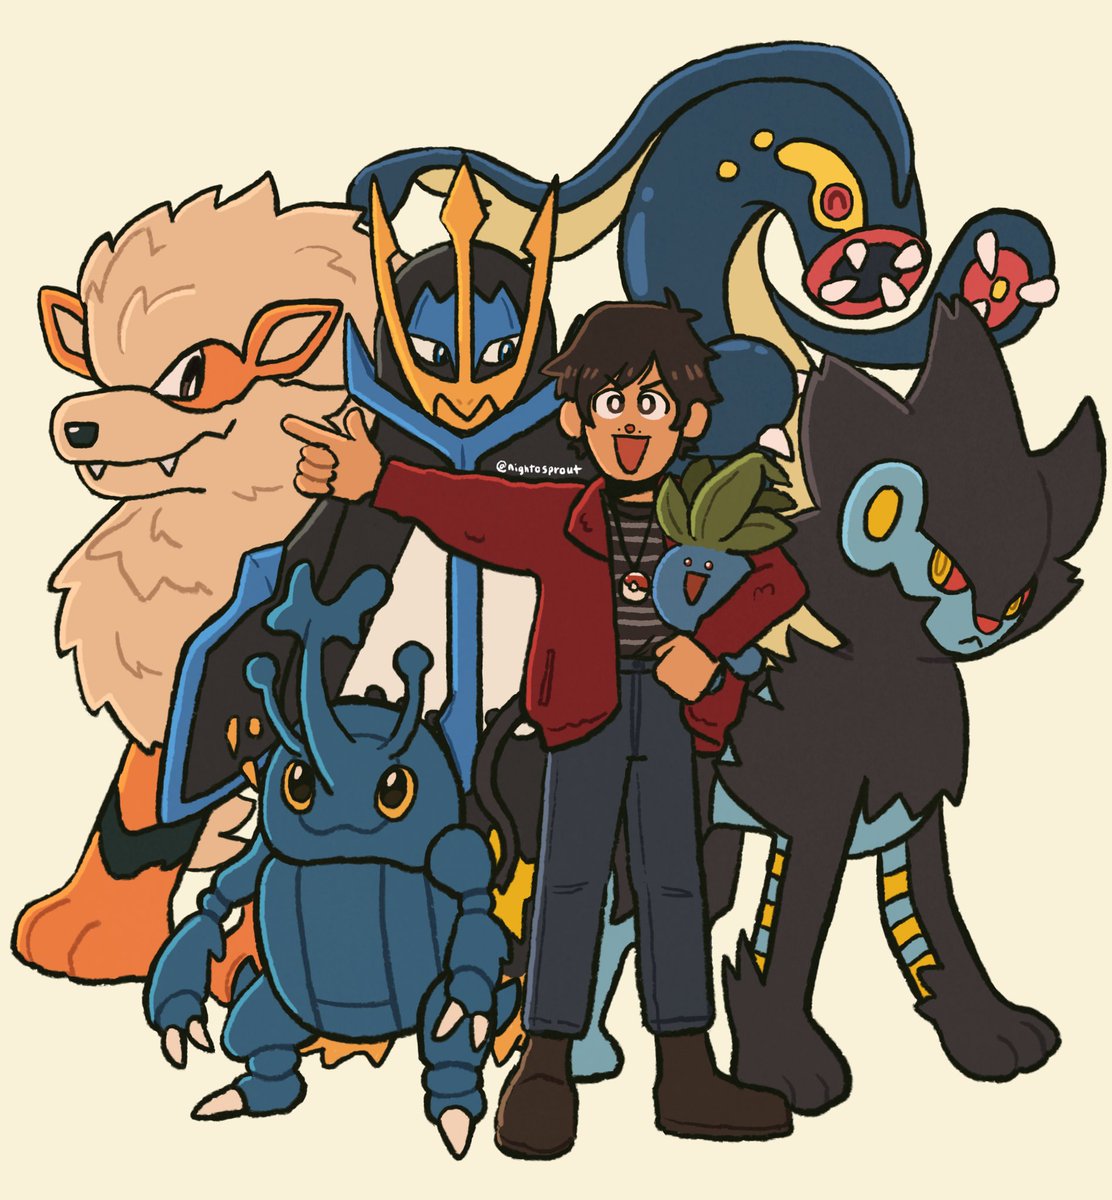 it’s the dream team babey!!! I decided to draw me and my team to celebrate #Pokemon25! ✌️🌱